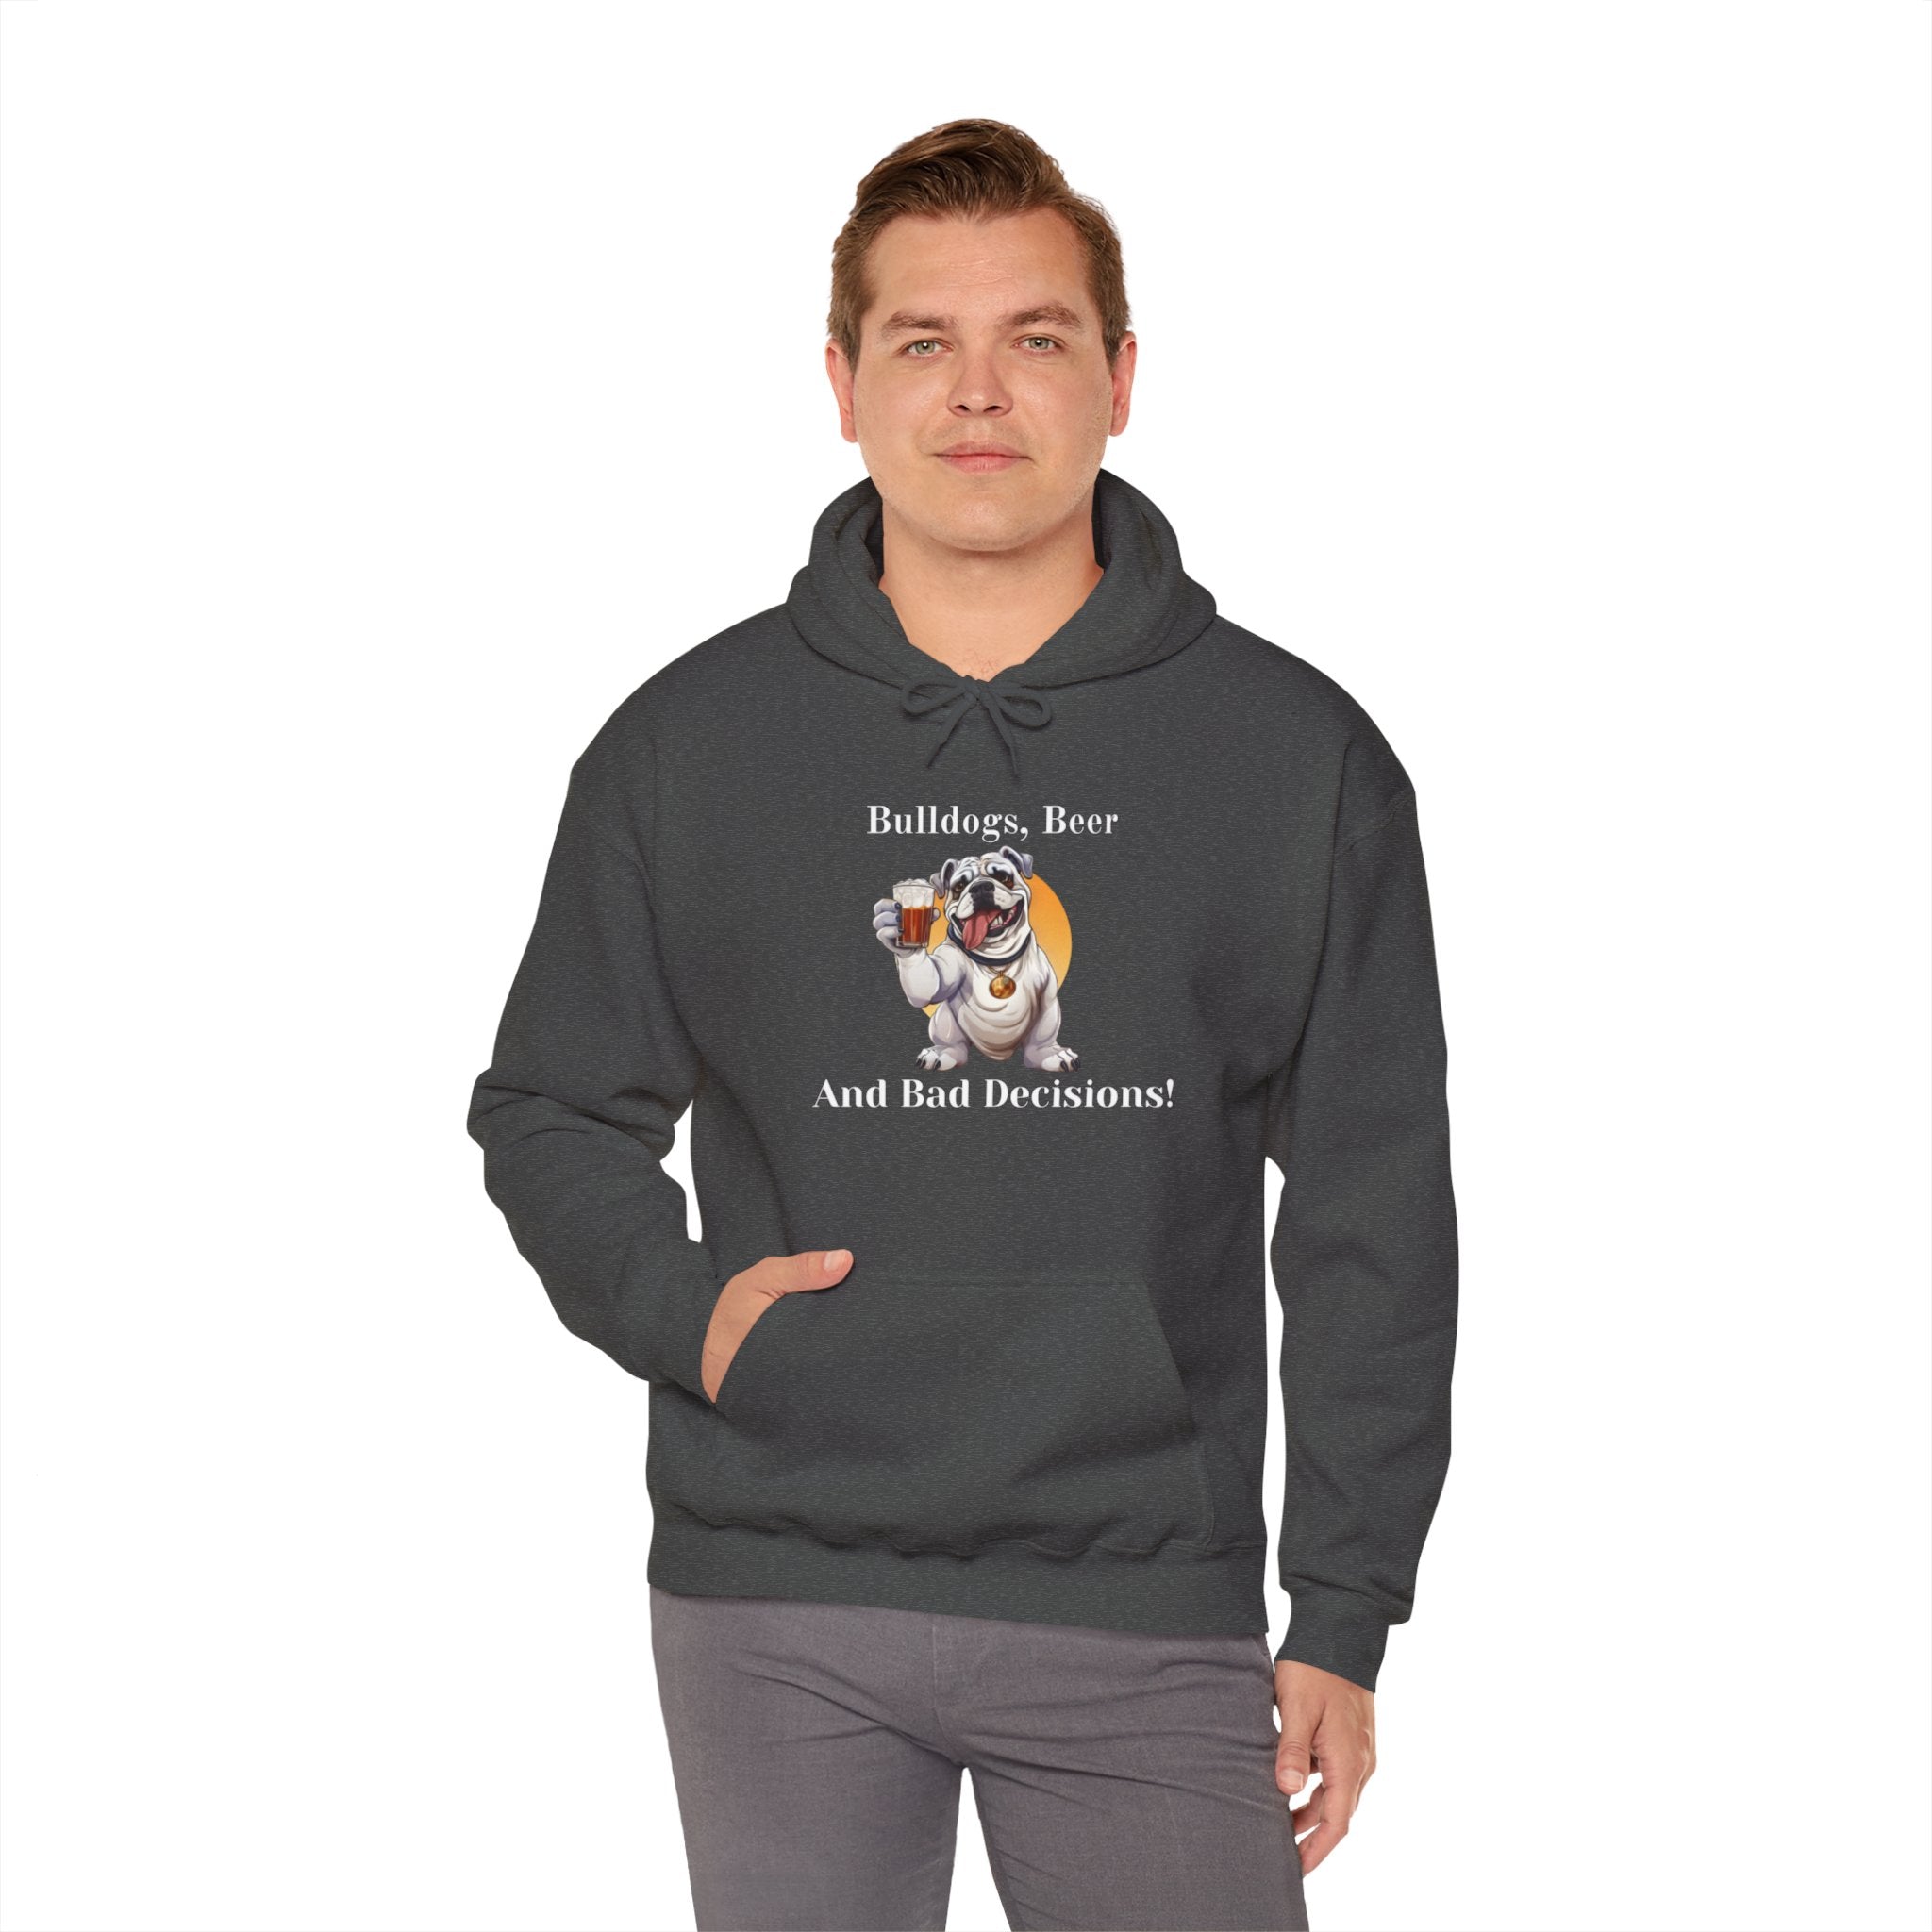 Bulldogs, Beer, and Bad Decisions" Hoodie - Your Go-To Gear for Mischievous Times! (English/White)